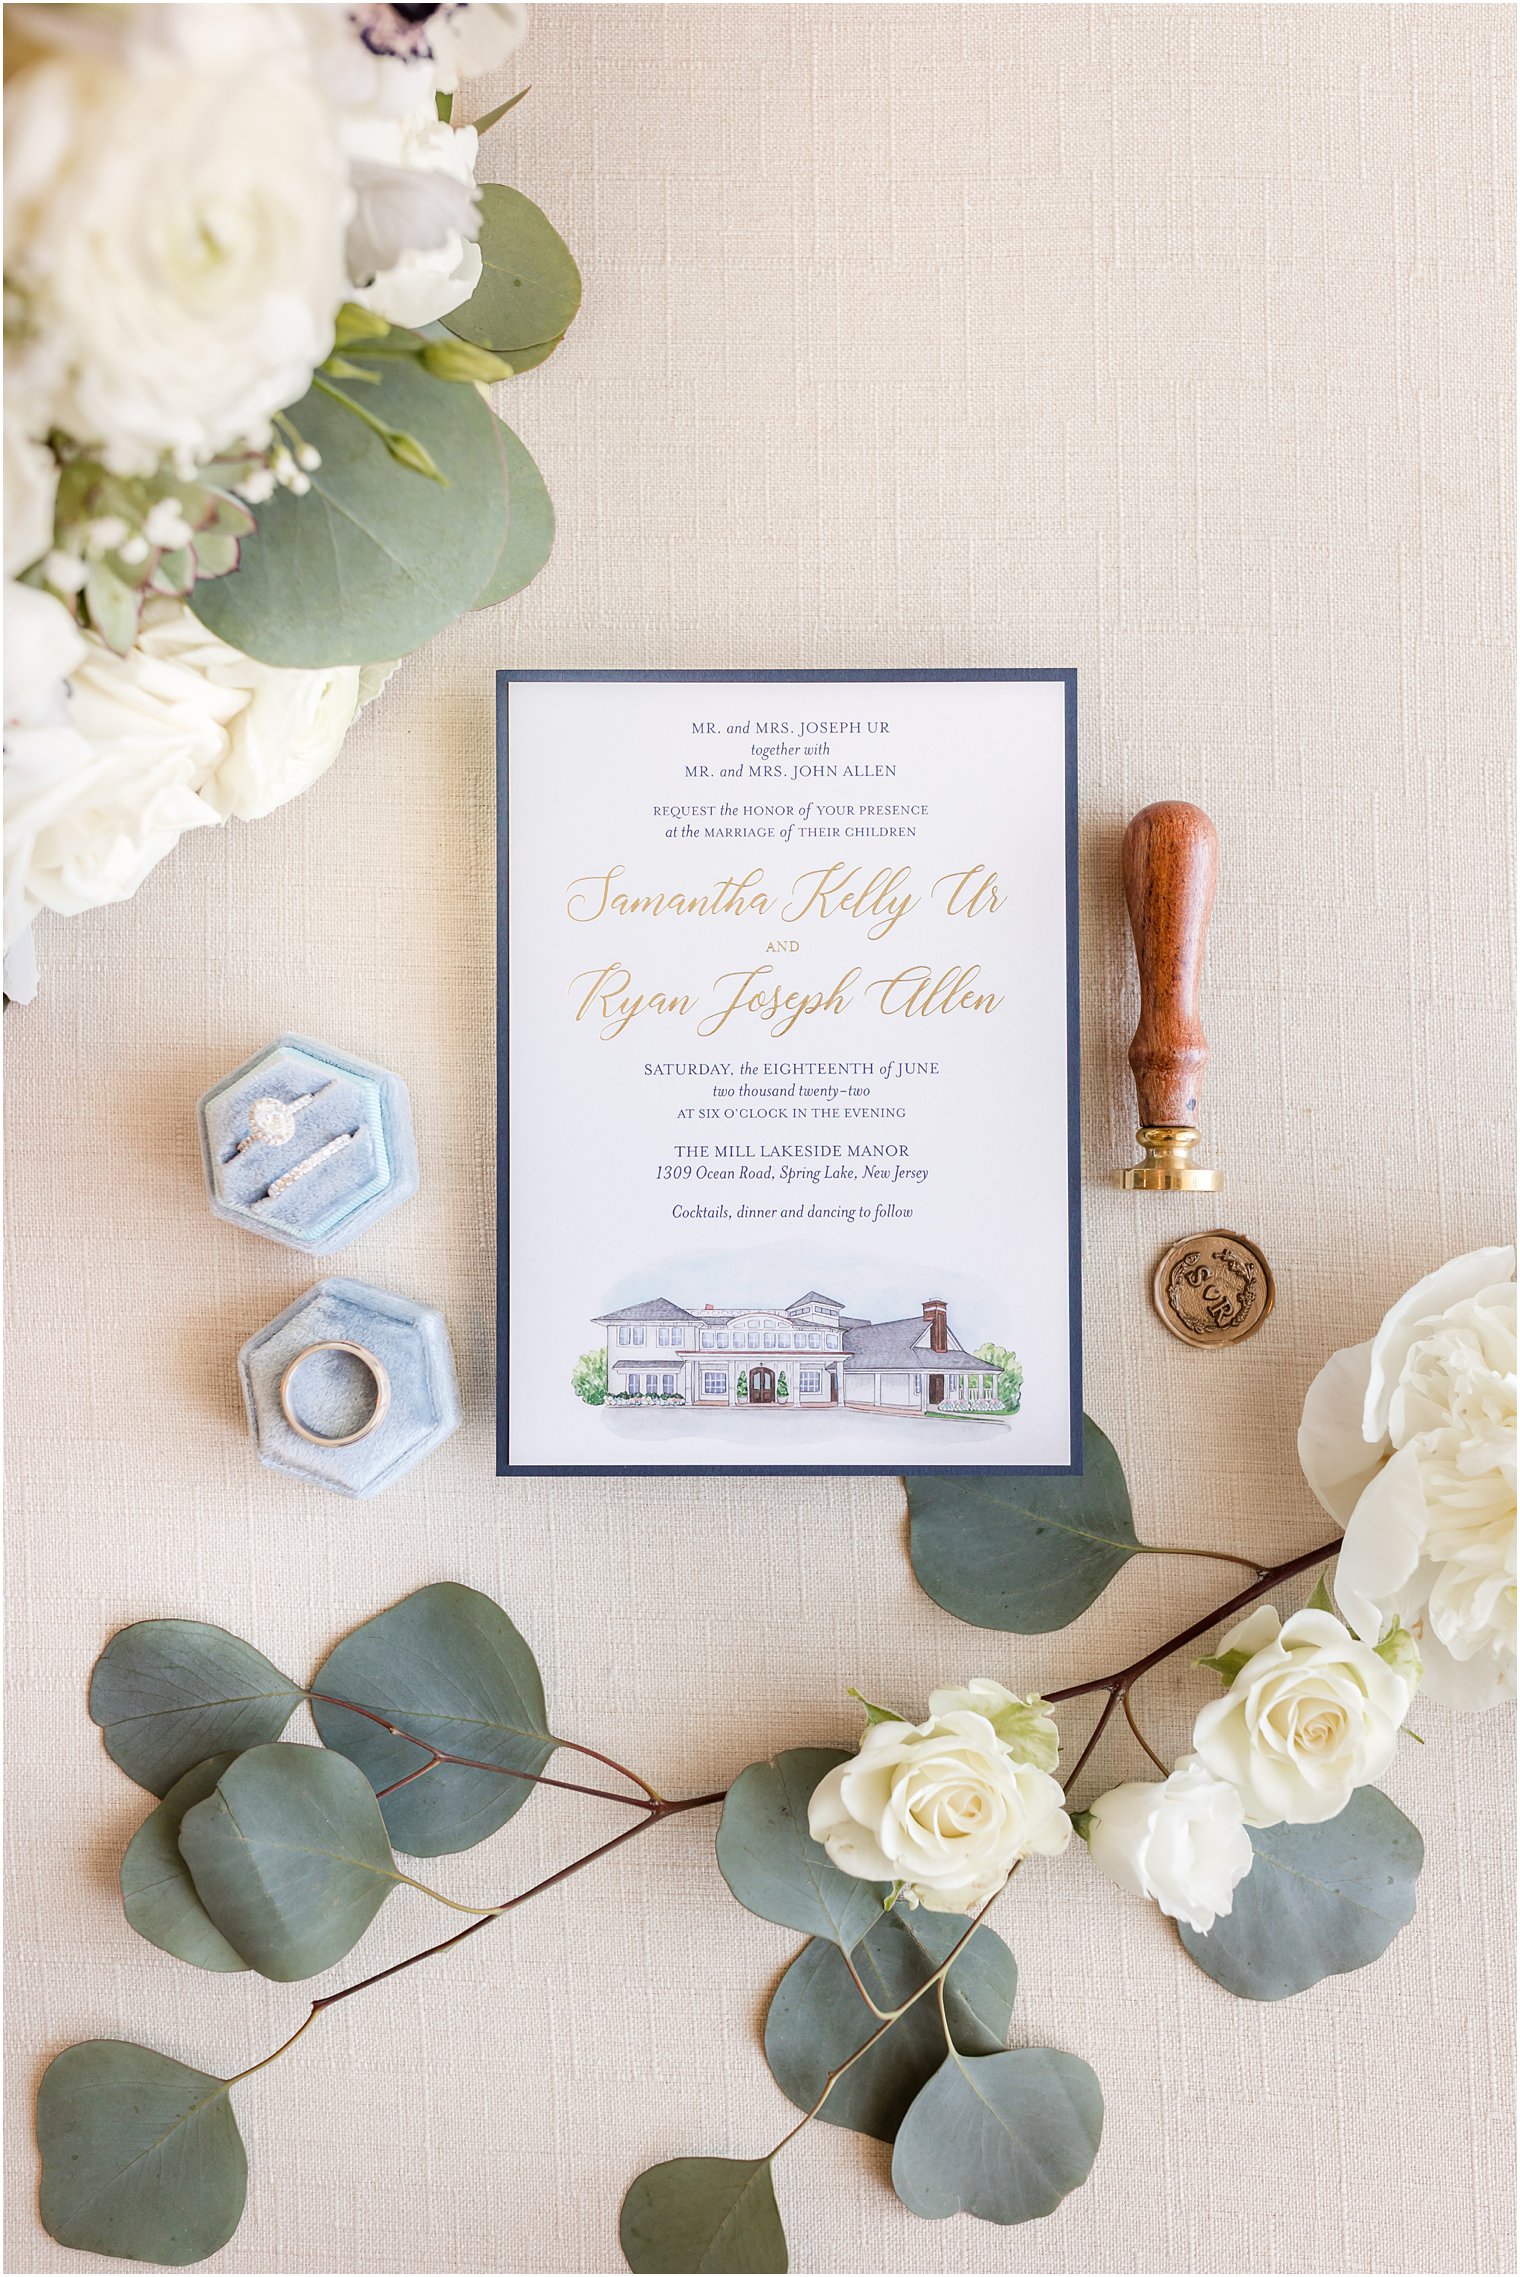 stationery set for The Mill Lakeside Manor wedding day with navy details 